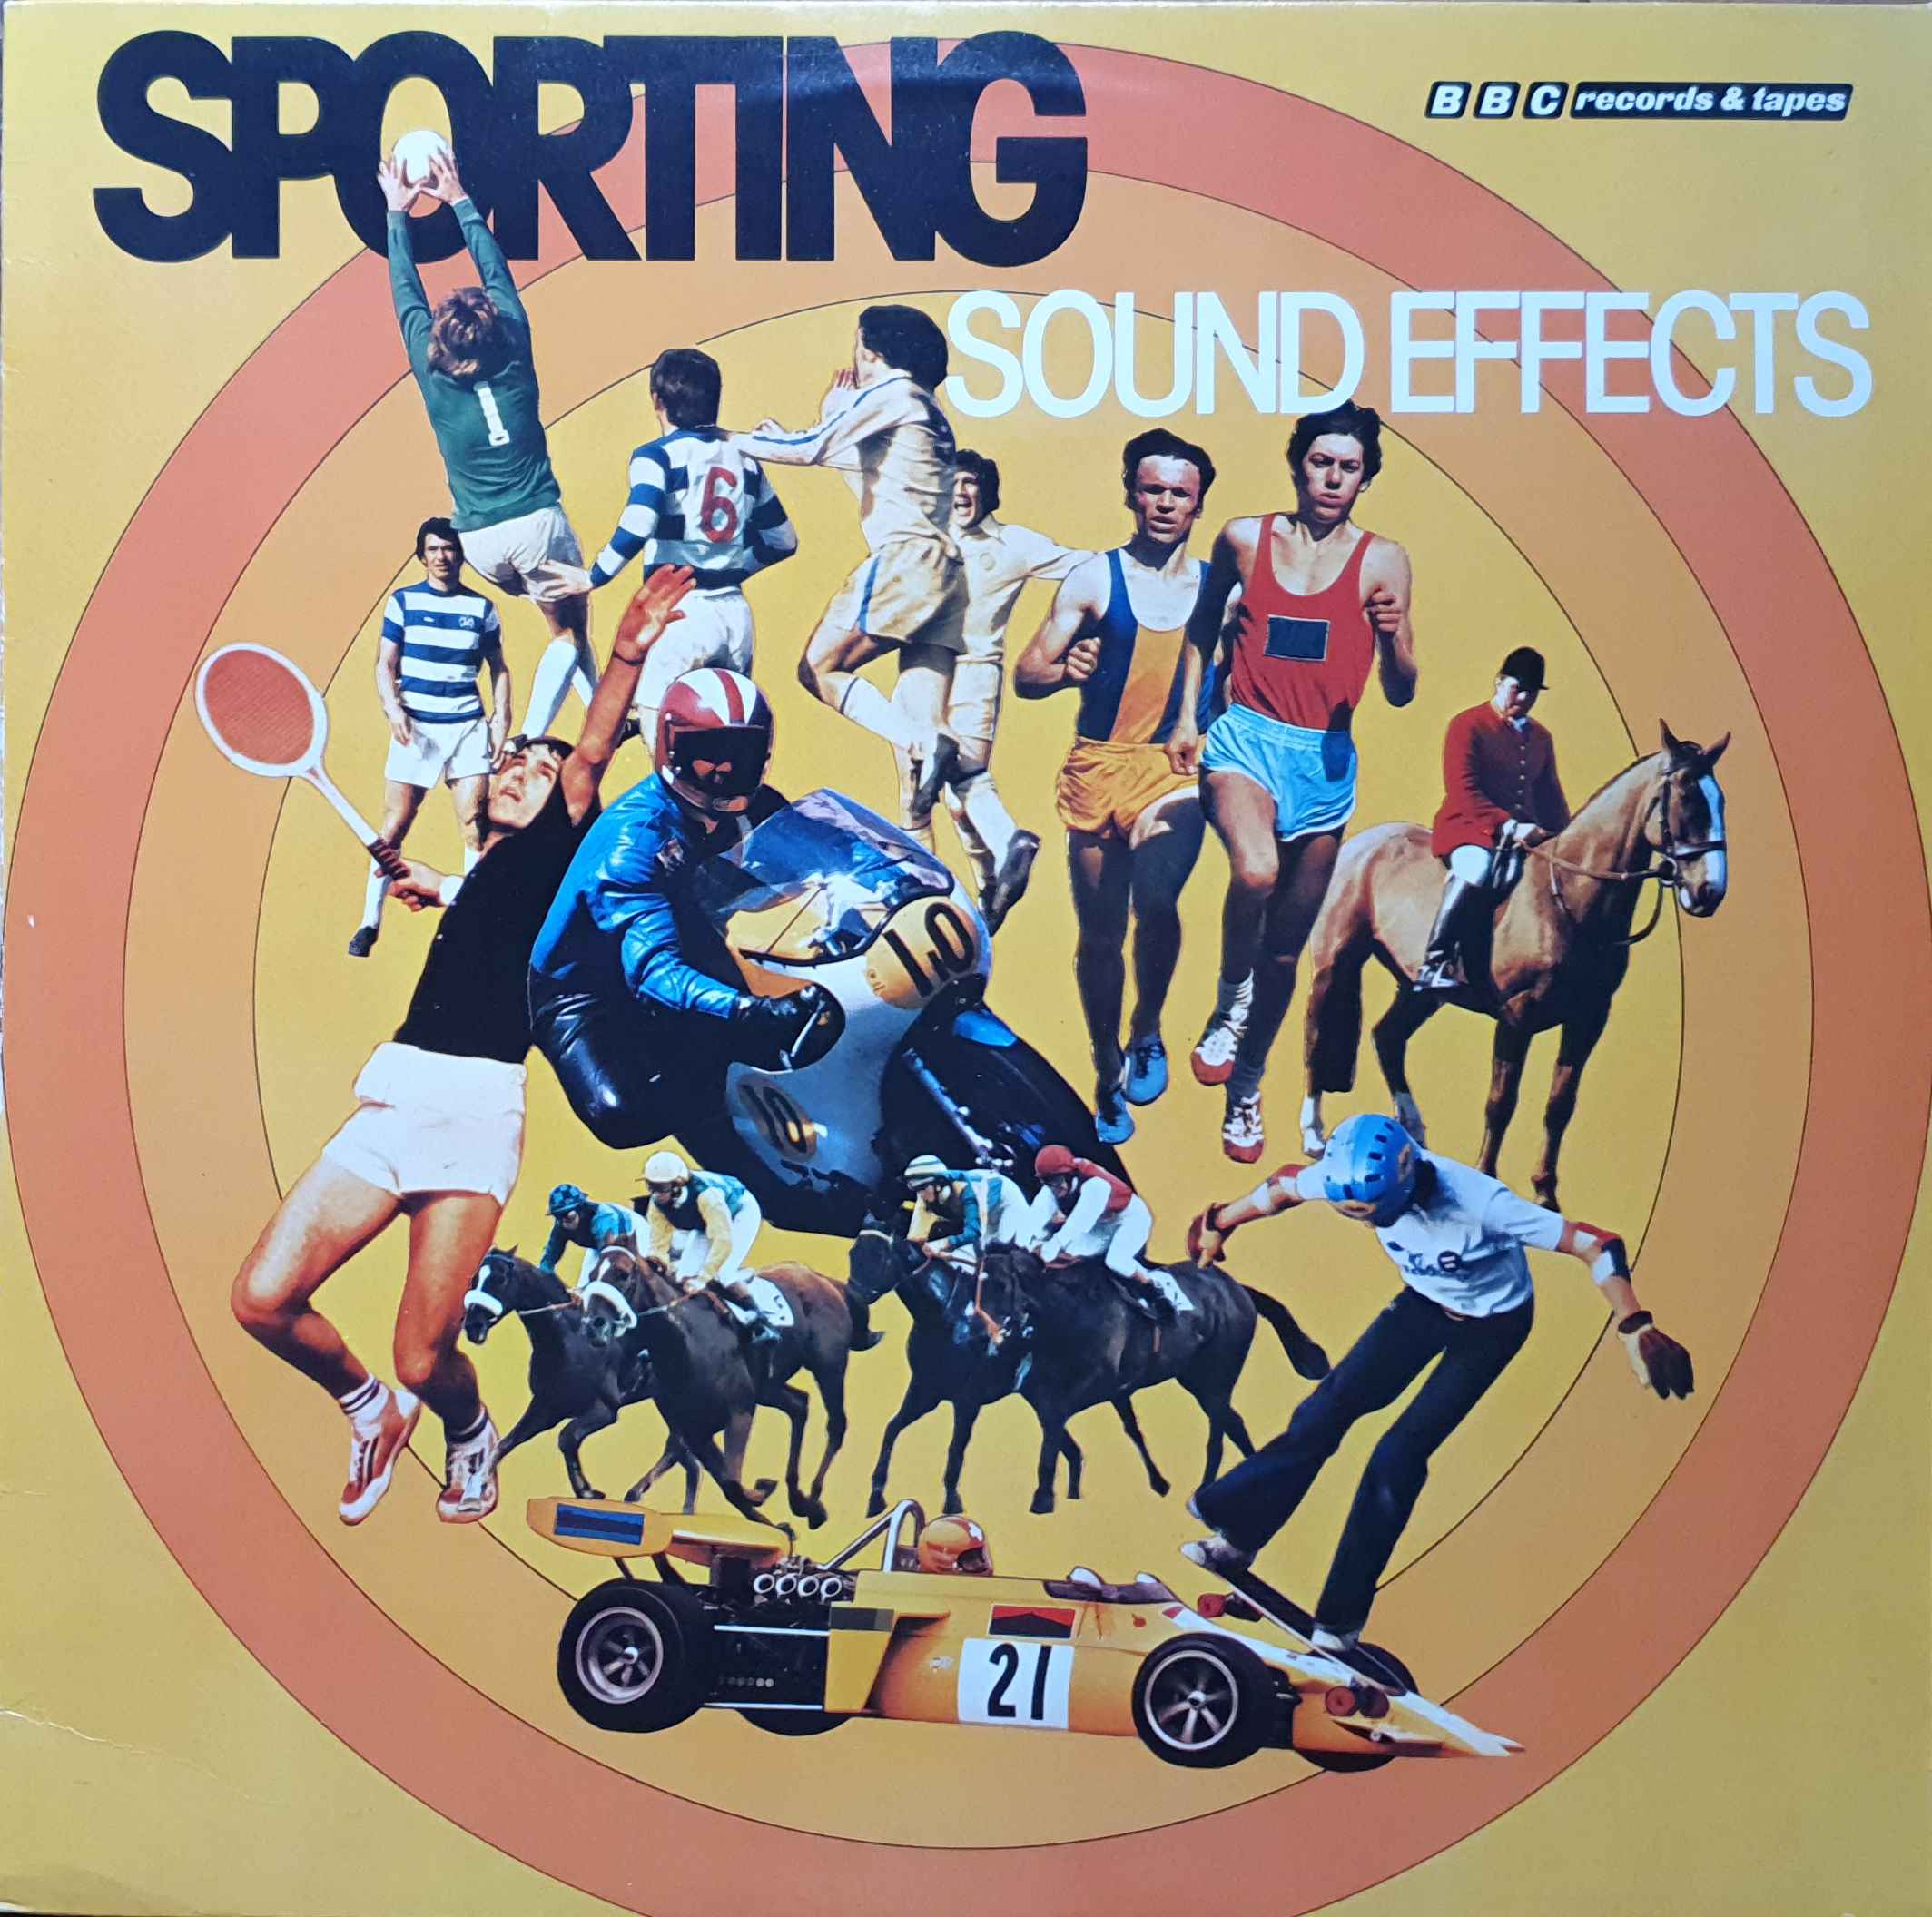 Picture of Sporting Sound Effects by artist Various from the BBC albums - Records and Tapes library